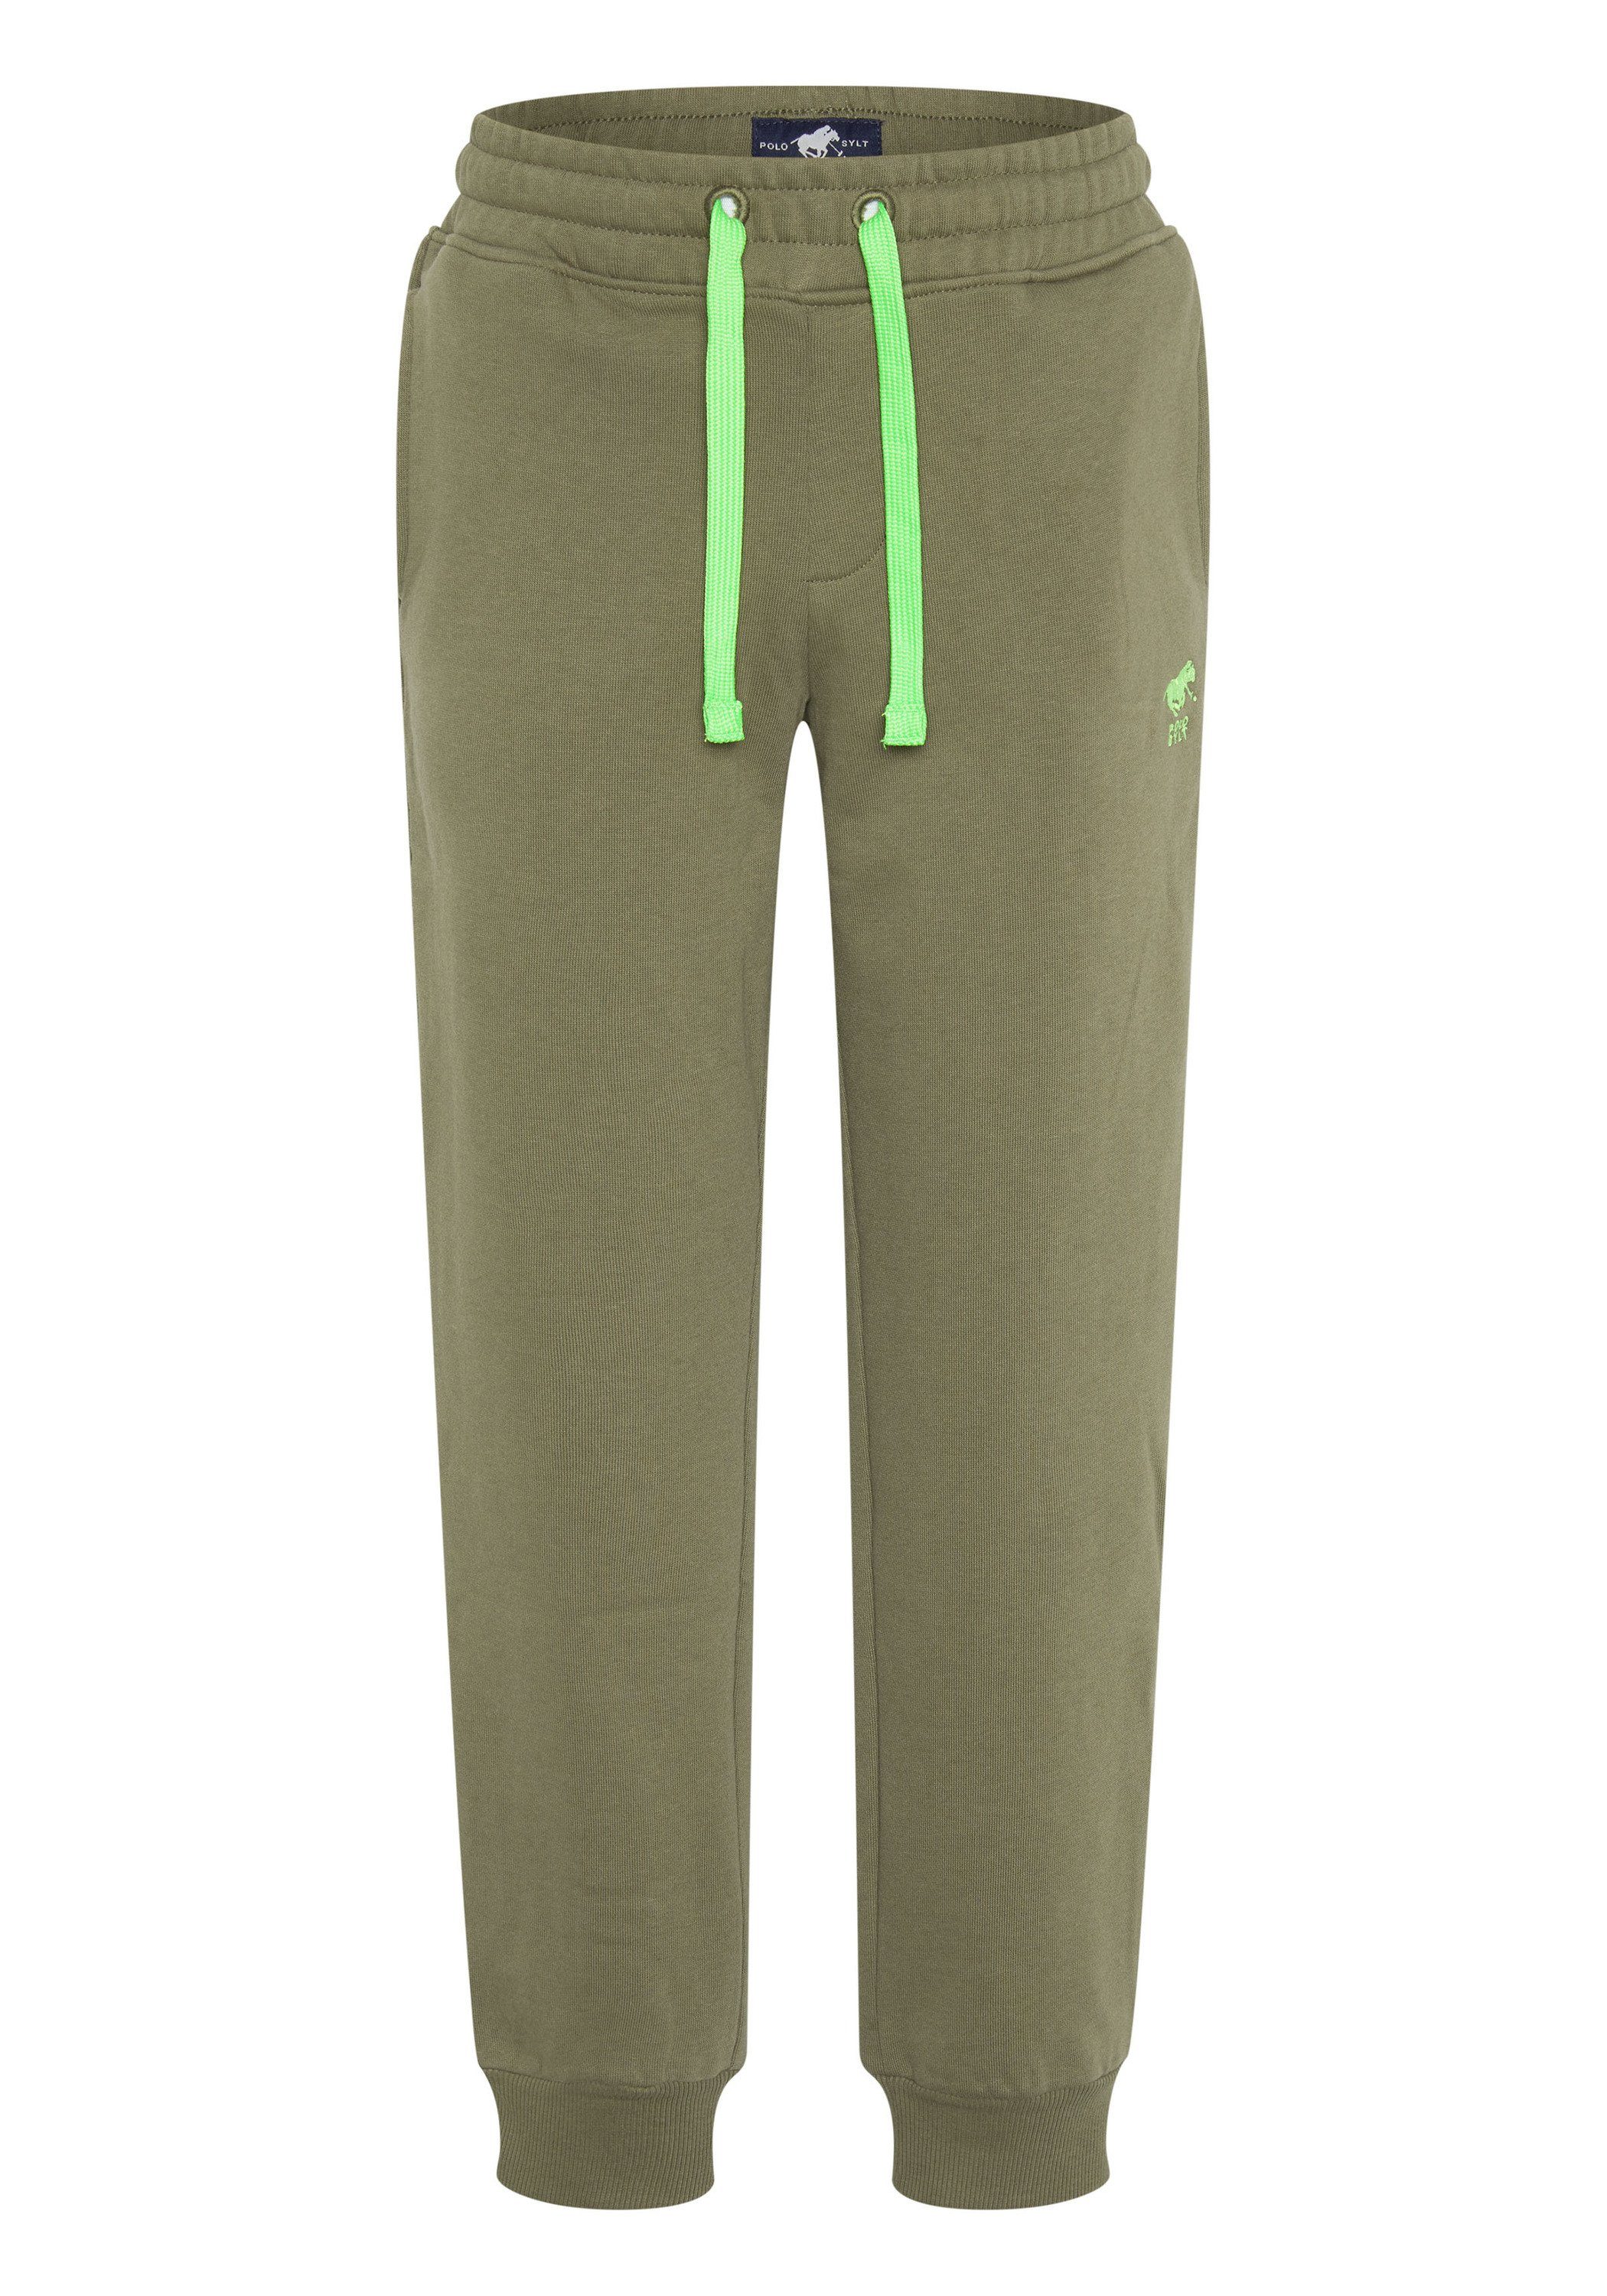 Sylt im Polo Olive 18-0521 Two-Tone-Look Burnt Jogginghose